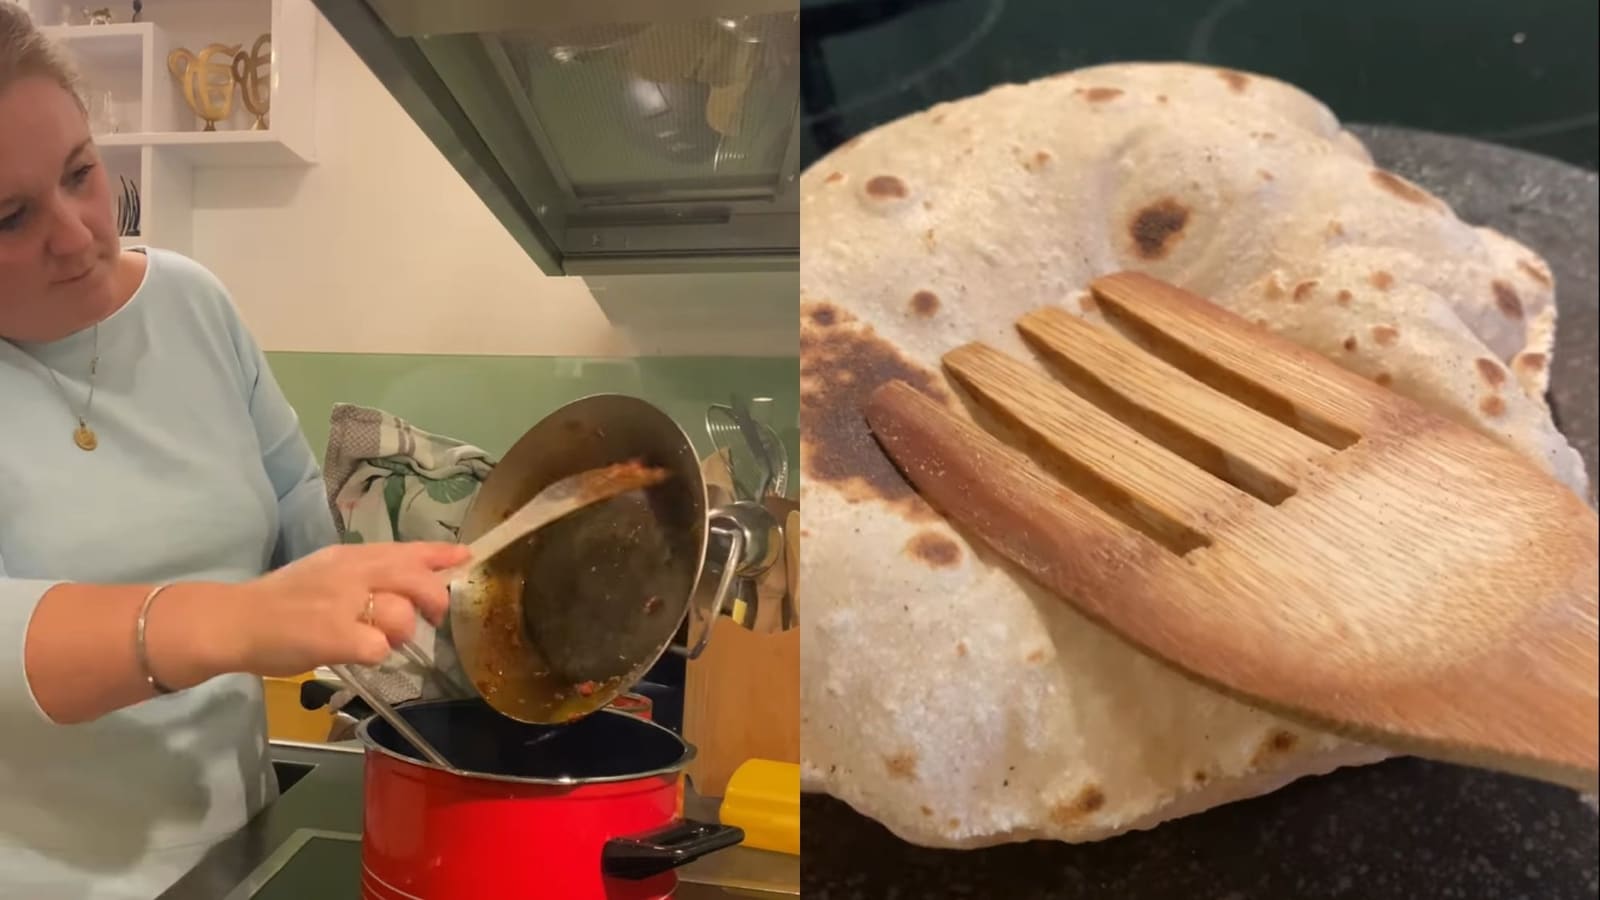 German woman cooks chana curry and rotis, wows netizens